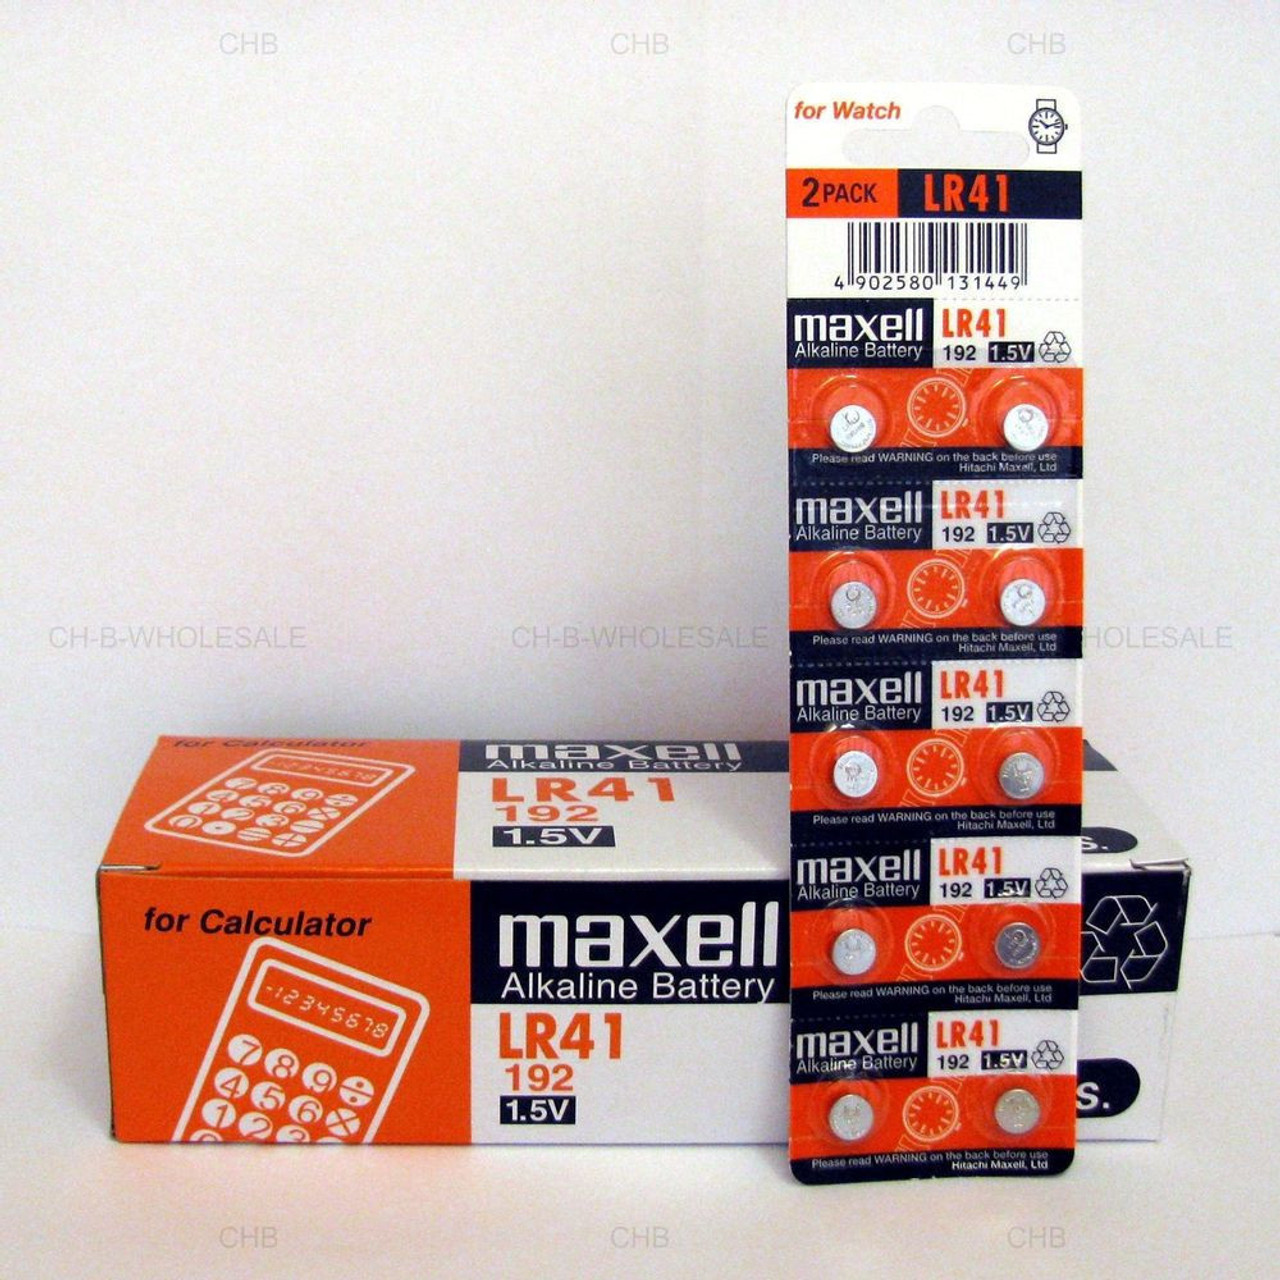 Sony Murata LR41 - 192 Alkaline Button Battery 1.5V - 100 Pack + FREE  SHIPPING! - Brooklyn Battery Works